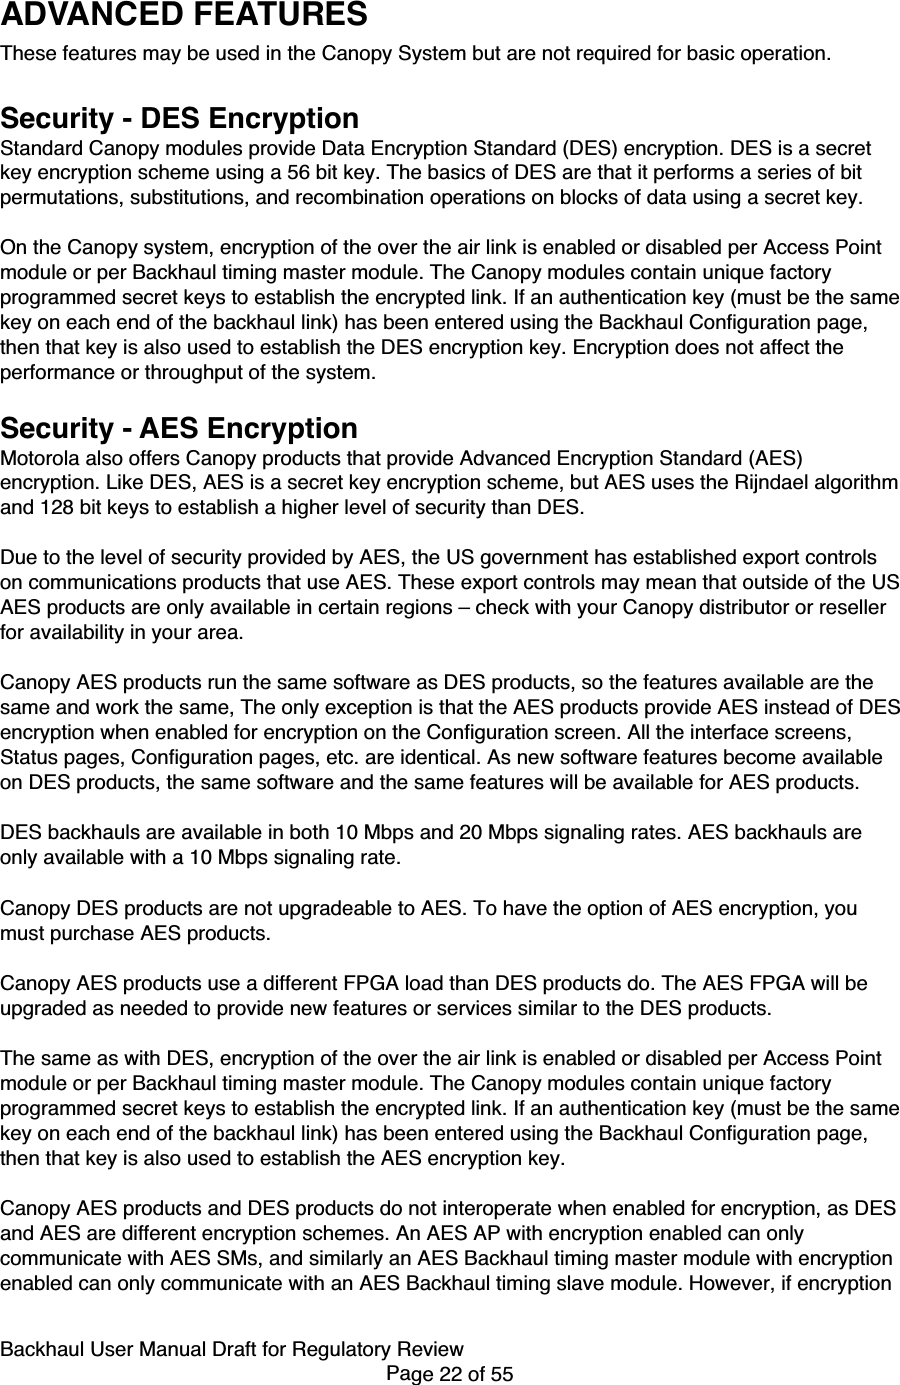 Backhaul User Manual Draft for Regulatory ReviewPage 22 of 55ADVANCED FEATURESThese features may be used in the Canopy System but are not required for basic operation.Security - DES EncryptionStandard Canopy modules provide Data Encryption Standard (DES) encryption. DES is a secretkey encryption scheme using a 56 bit key. The basics of DES are that it performs a series of bitpermutations, substitutions, and recombination operations on blocks of data using a secret key.On the Canopy system, encryption of the over the air link is enabled or disabled per Access Pointmodule or per Backhaul timing master module. The Canopy modules contain unique factoryprogrammed secret keys to establish the encrypted link. If an authentication key (must be the samekey on each end of the backhaul link) has been entered using the Backhaul Configuration page,then that key is also used to establish the DES encryption key. Encryption does not affect theperformance or throughput of the system.Security - AES EncryptionMotorola also offers Canopy products that provide Advanced Encryption Standard (AES)encryption. Like DES, AES is a secret key encryption scheme, but AES uses the Rijndael algorithmand 128 bit keys to establish a higher level of security than DES.Due to the level of security provided by AES, the US government has established export controlson communications products that use AES. These export controls may mean that outside of the USAES products are only available in certain regions – check with your Canopy distributor or resellerfor availability in your area.Canopy AES products run the same software as DES products, so the features available are thesame and work the same, The only exception is that the AES products provide AES instead of DESencryption when enabled for encryption on the Configuration screen. All the interface screens,Status pages, Configuration pages, etc. are identical. As new software features become availableon DES products, the same software and the same features will be available for AES products.DES backhauls are available in both 10 Mbps and 20 Mbps signaling rates. AES backhauls areonly available with a 10 Mbps signaling rate.Canopy DES products are not upgradeable to AES. To have the option of AES encryption, youmust purchase AES products.Canopy AES products use a different FPGA load than DES products do. The AES FPGA will beupgraded as needed to provide new features or services similar to the DES products.The same as with DES, encryption of the over the air link is enabled or disabled per Access Pointmodule or per Backhaul timing master module. The Canopy modules contain unique factoryprogrammed secret keys to establish the encrypted link. If an authentication key (must be the samekey on each end of the backhaul link) has been entered using the Backhaul Configuration page,then that key is also used to establish the AES encryption key.Canopy AES products and DES products do not interoperate when enabled for encryption, as DESand AES are different encryption schemes. An AES AP with encryption enabled can onlycommunicate with AES SMs, and similarly an AES Backhaul timing master module with encryptionenabled can only communicate with an AES Backhaul timing slave module. However, if encryption